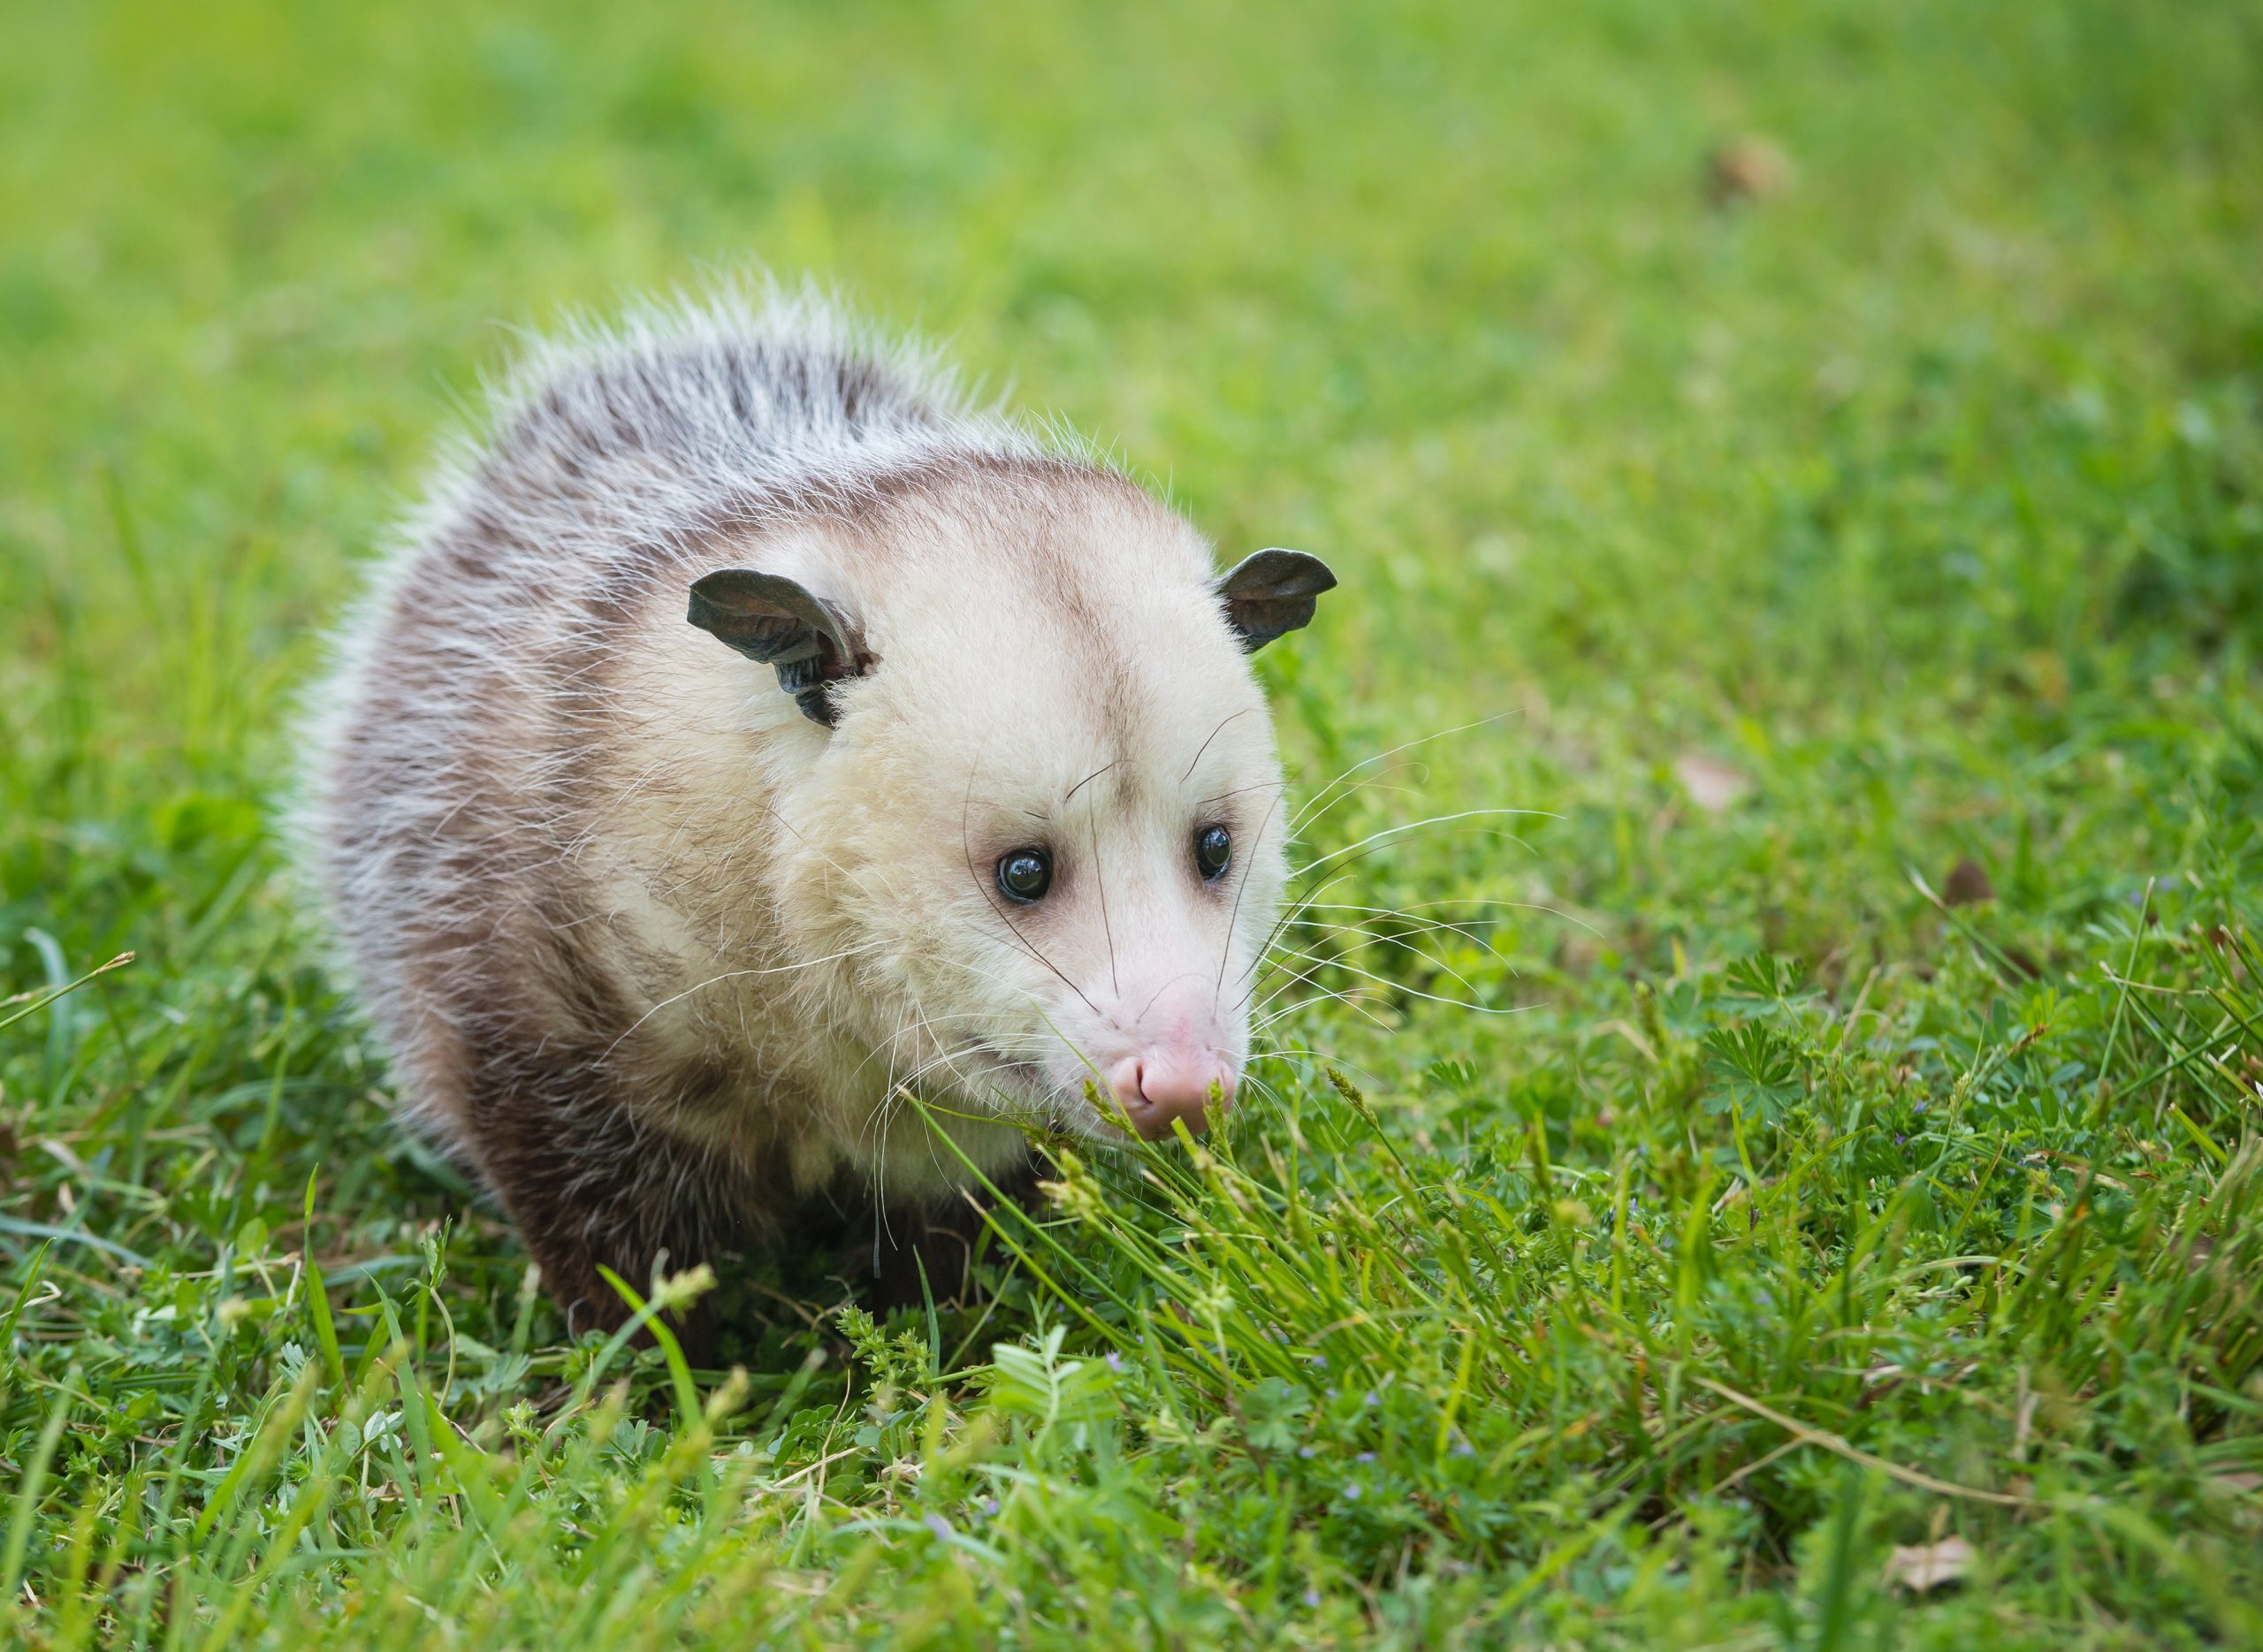 Virginia Opossum foraging for food in grass